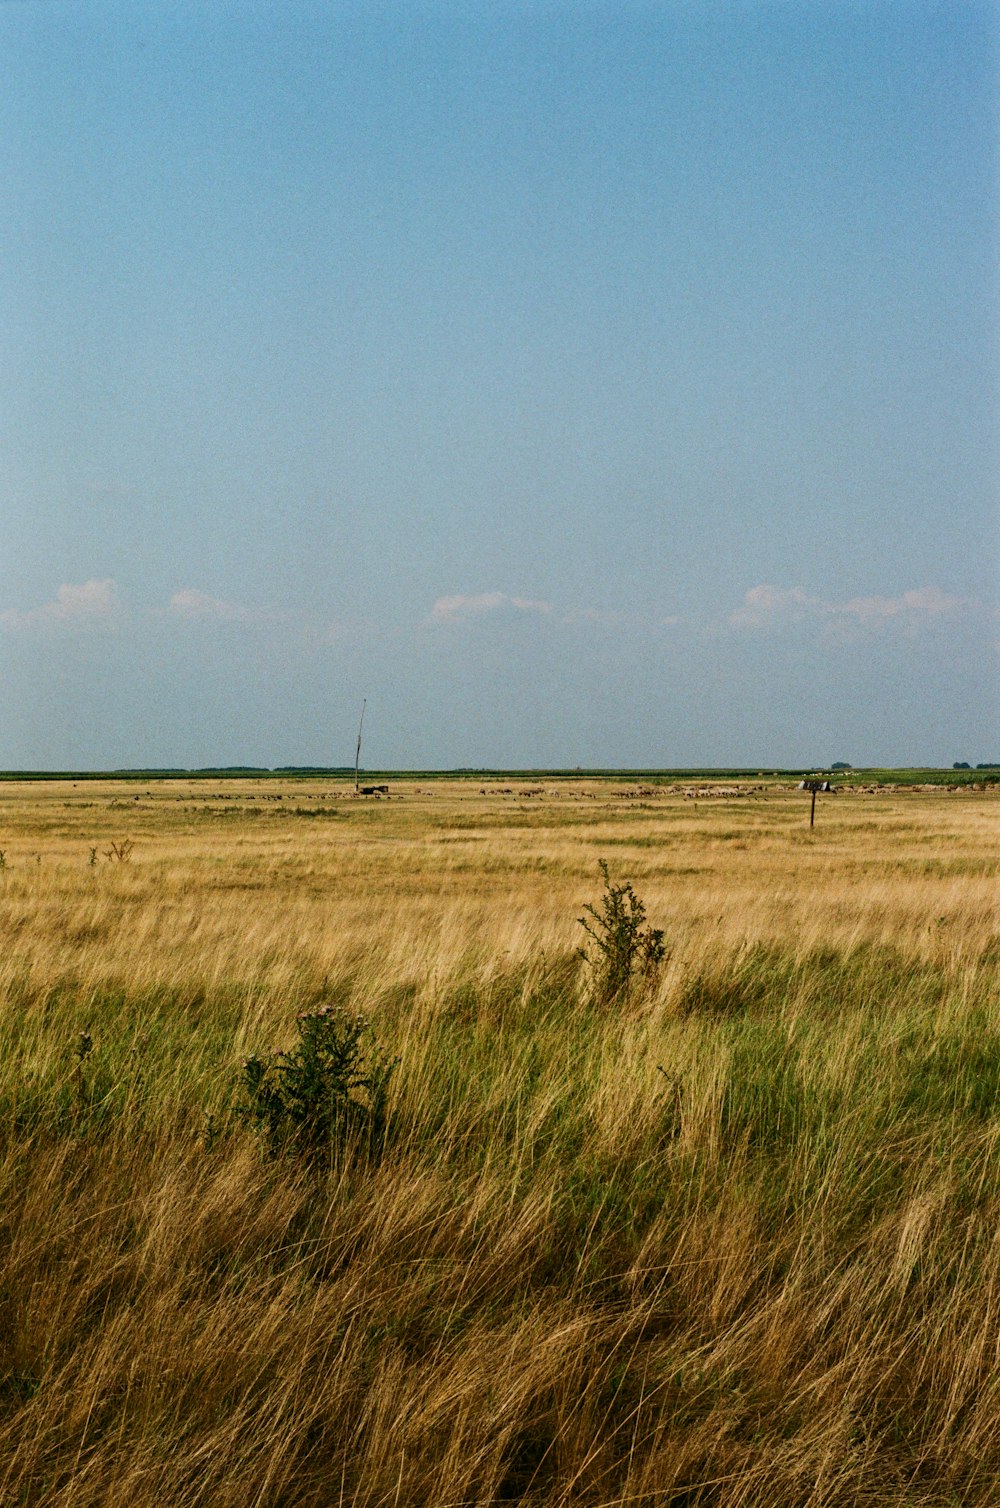 a field of grass with a giraffe in the distance